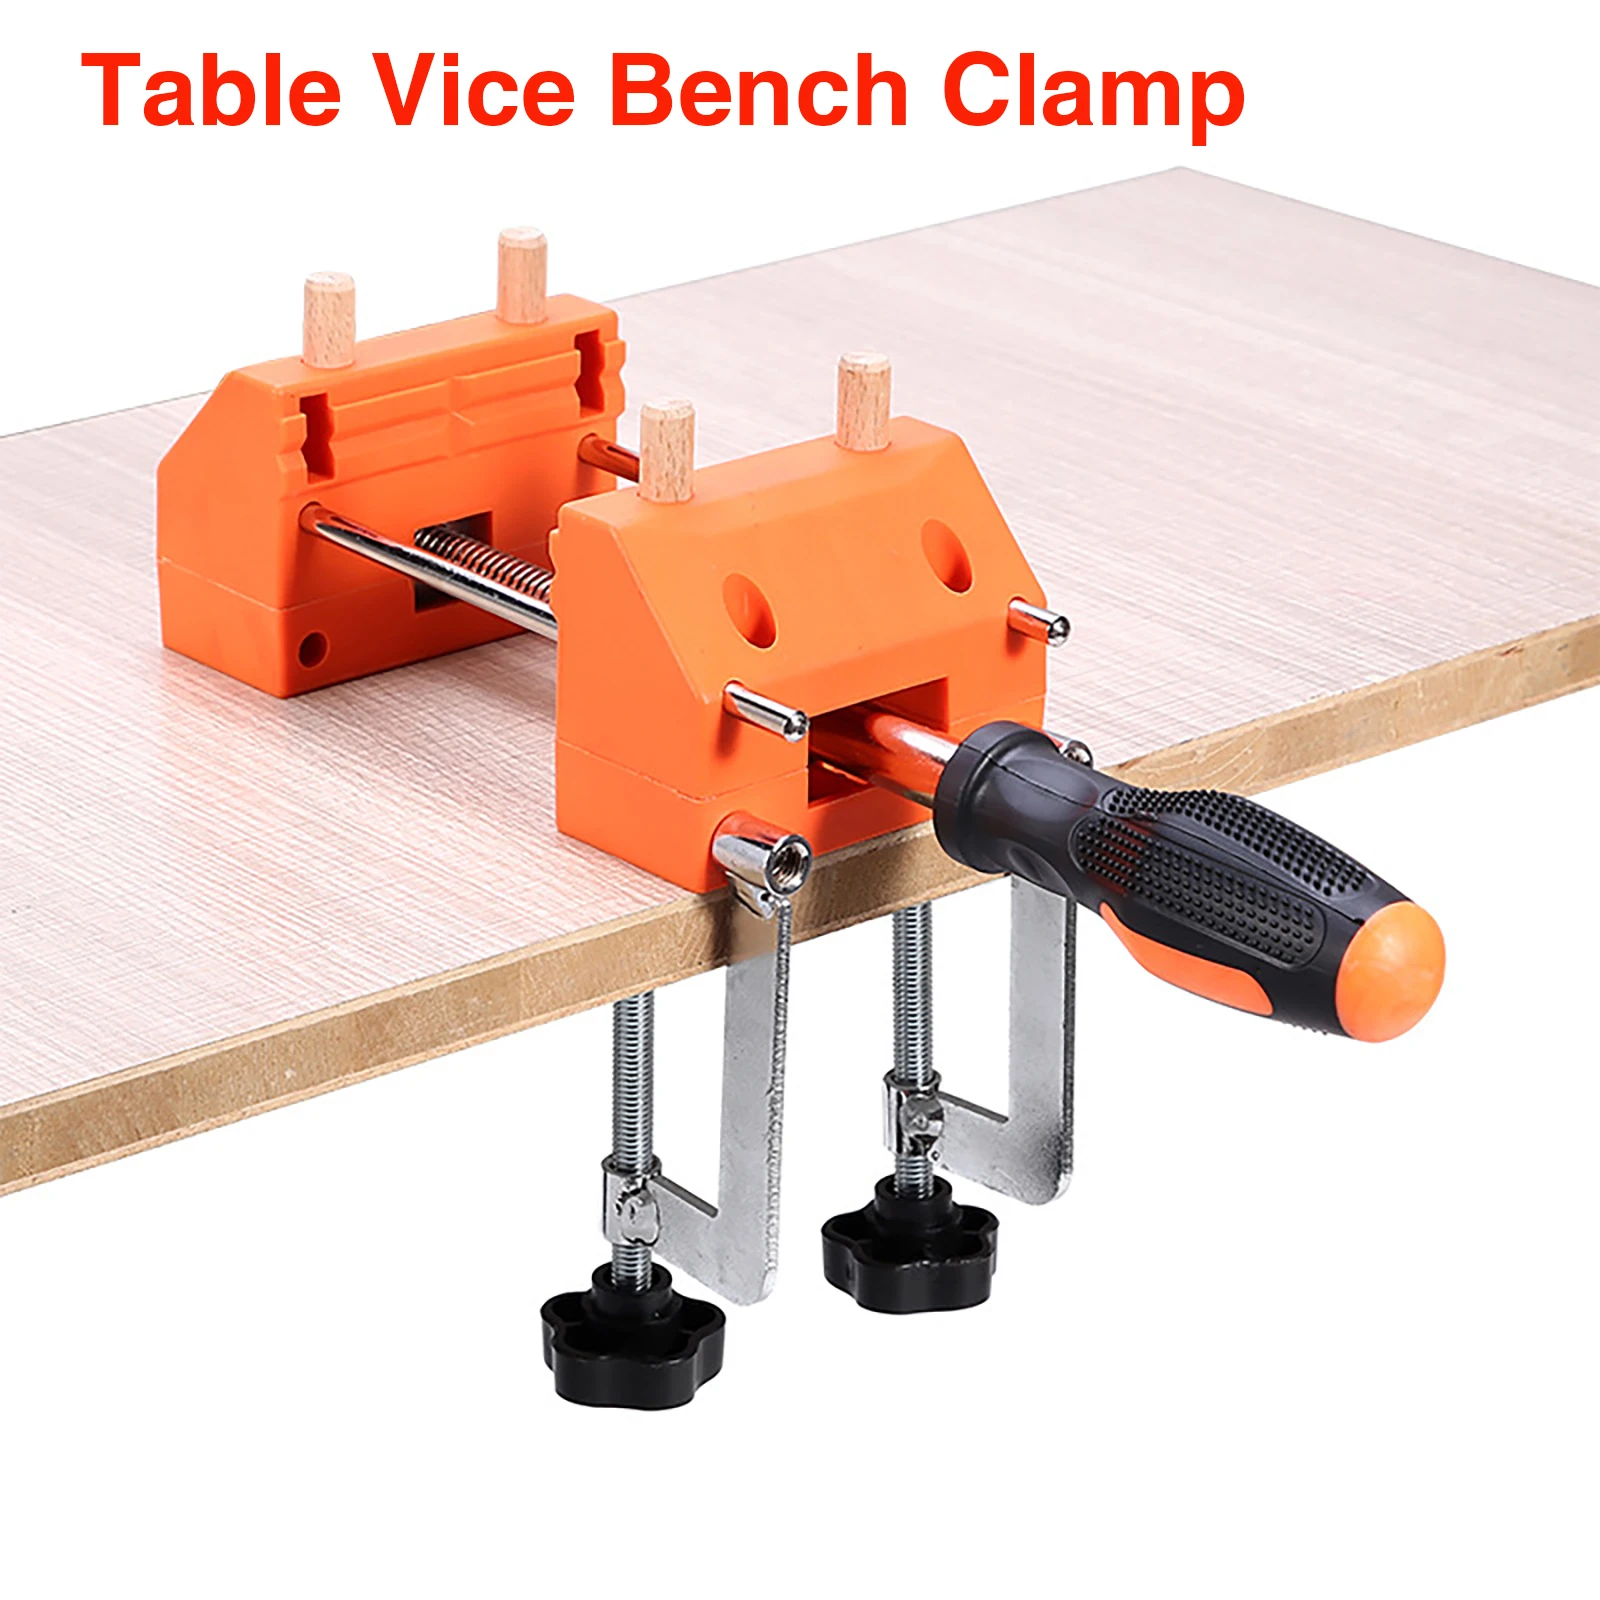 

Household Bench Clamp Mini Multi-functional Universal Flat Pliers Adjustable Woodworking Table Vice Workbench Clamp Bench Vise